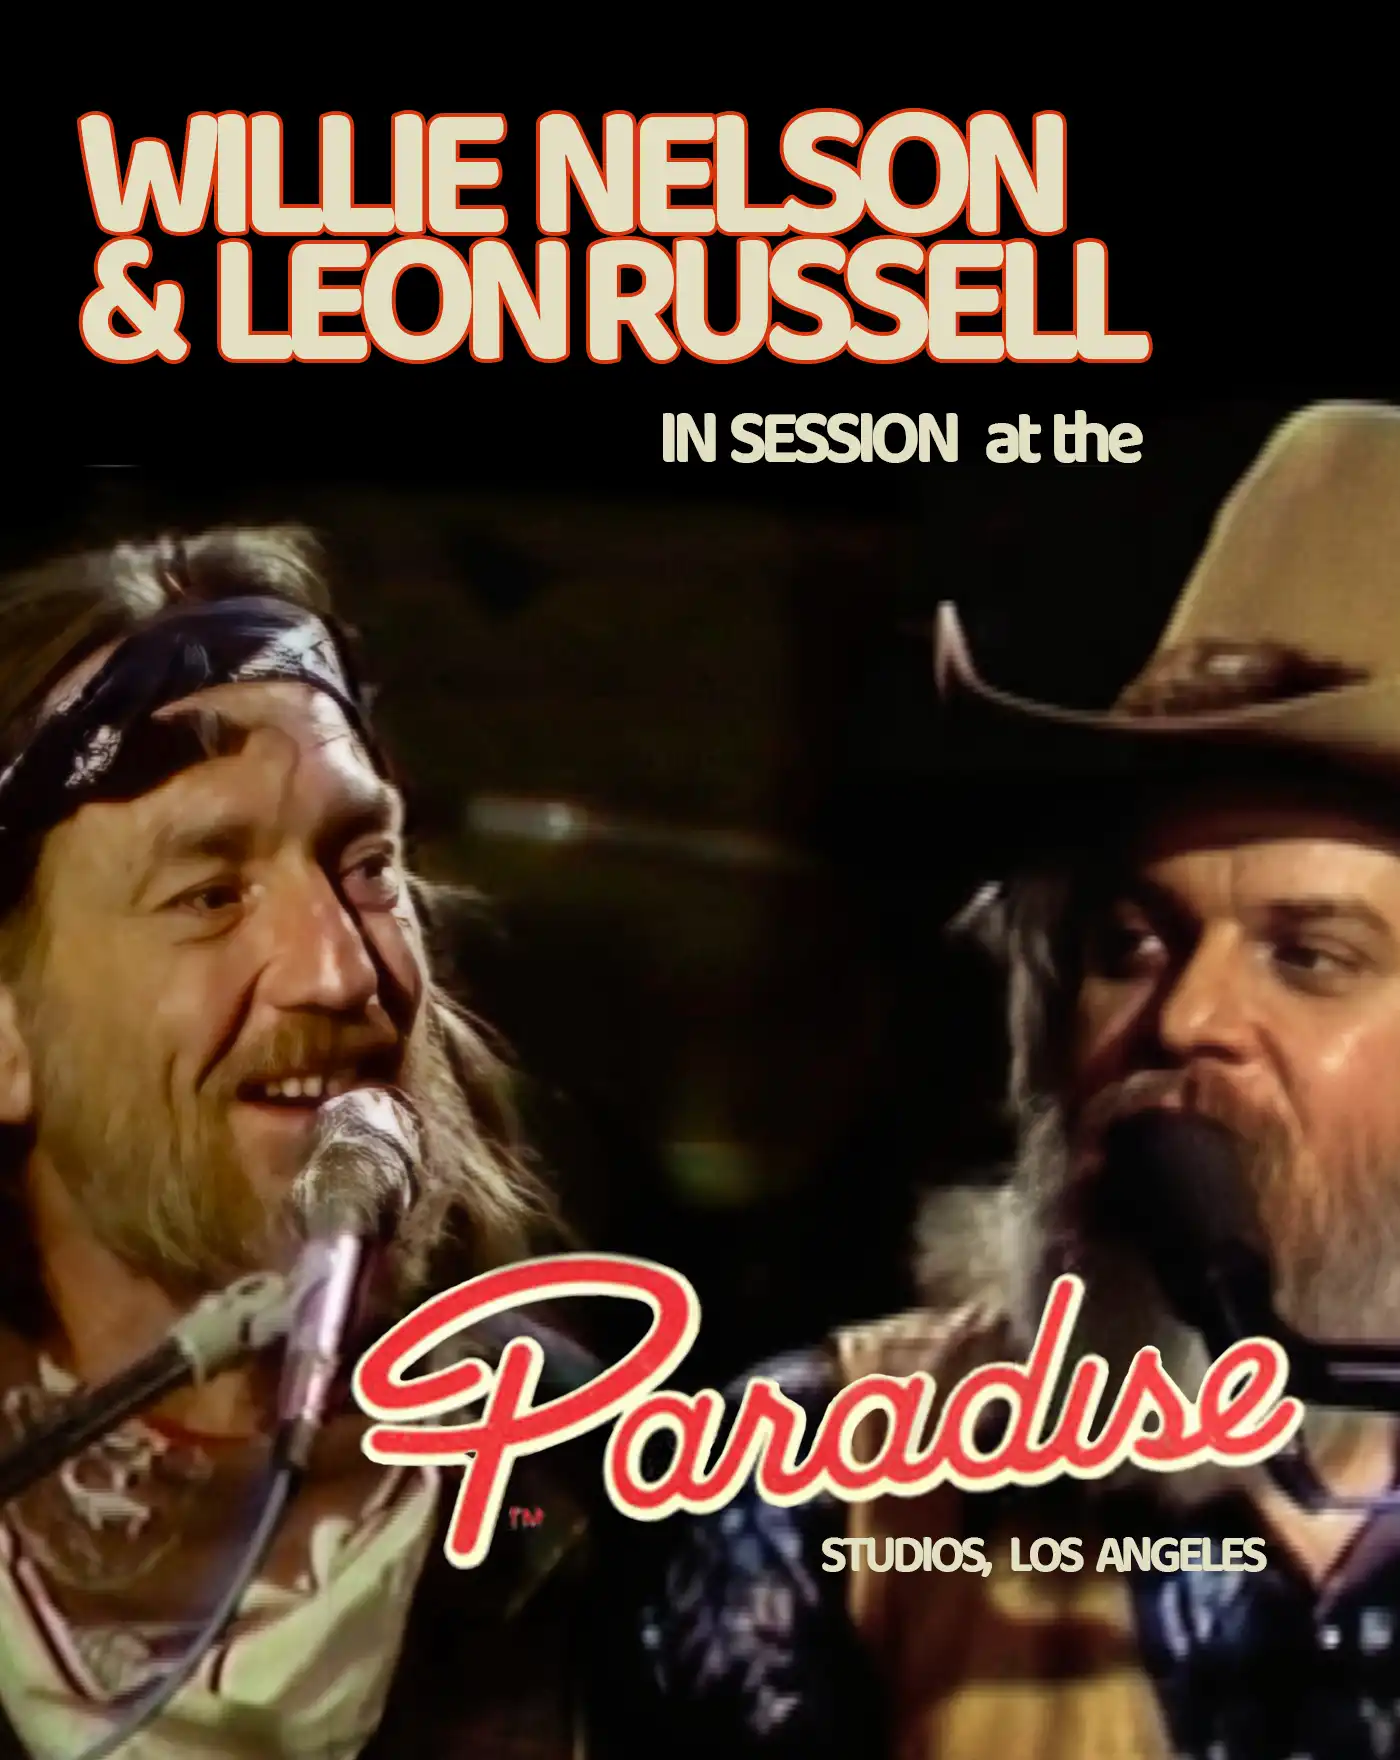 Willie Nelson & Leon Russell in Session at the Paradise Studios - Trailer